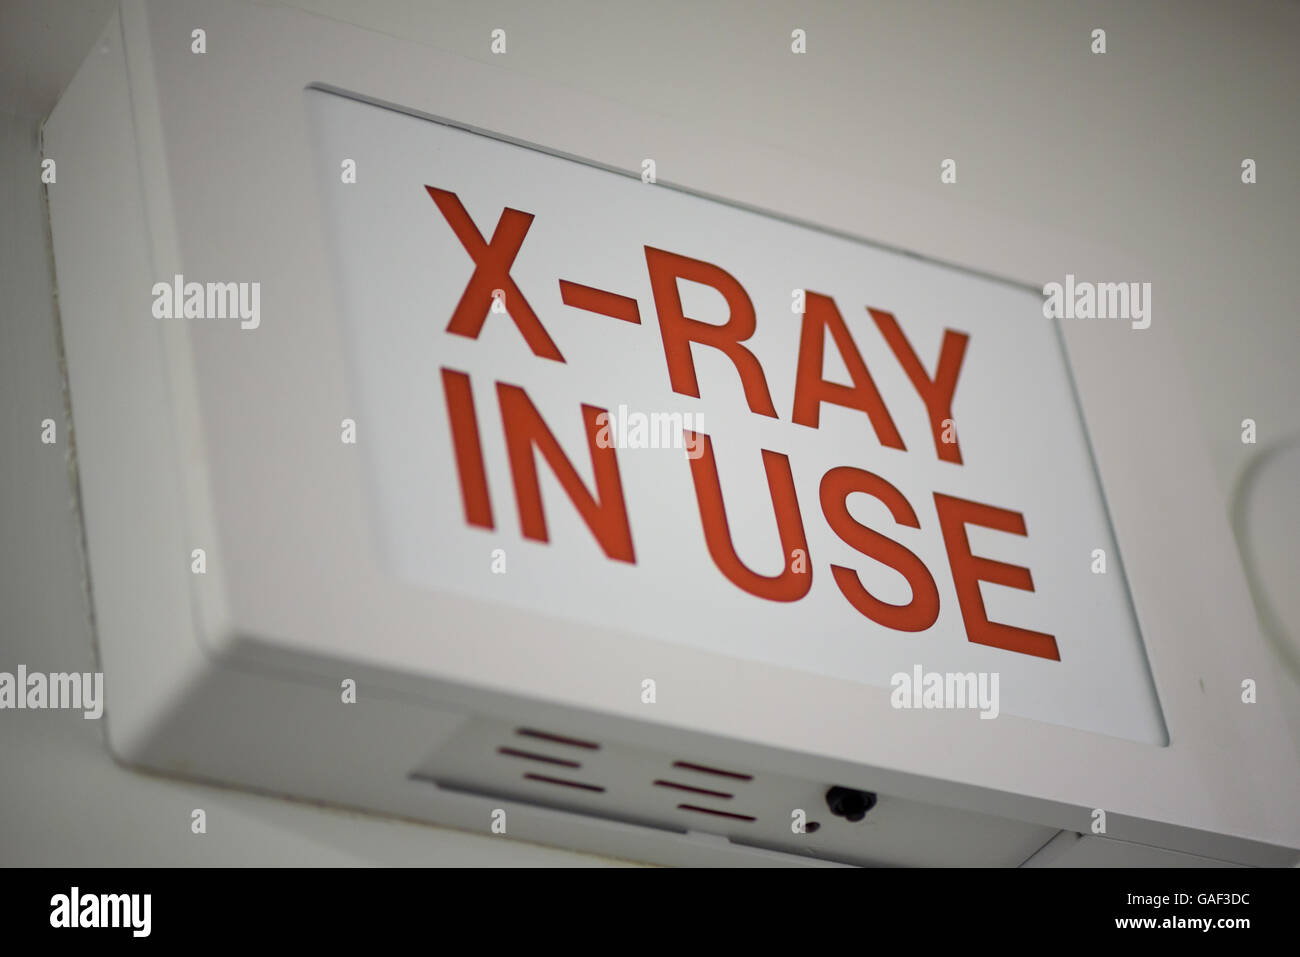 A warning sign that illuminates when x-rays are in use Stock Photo